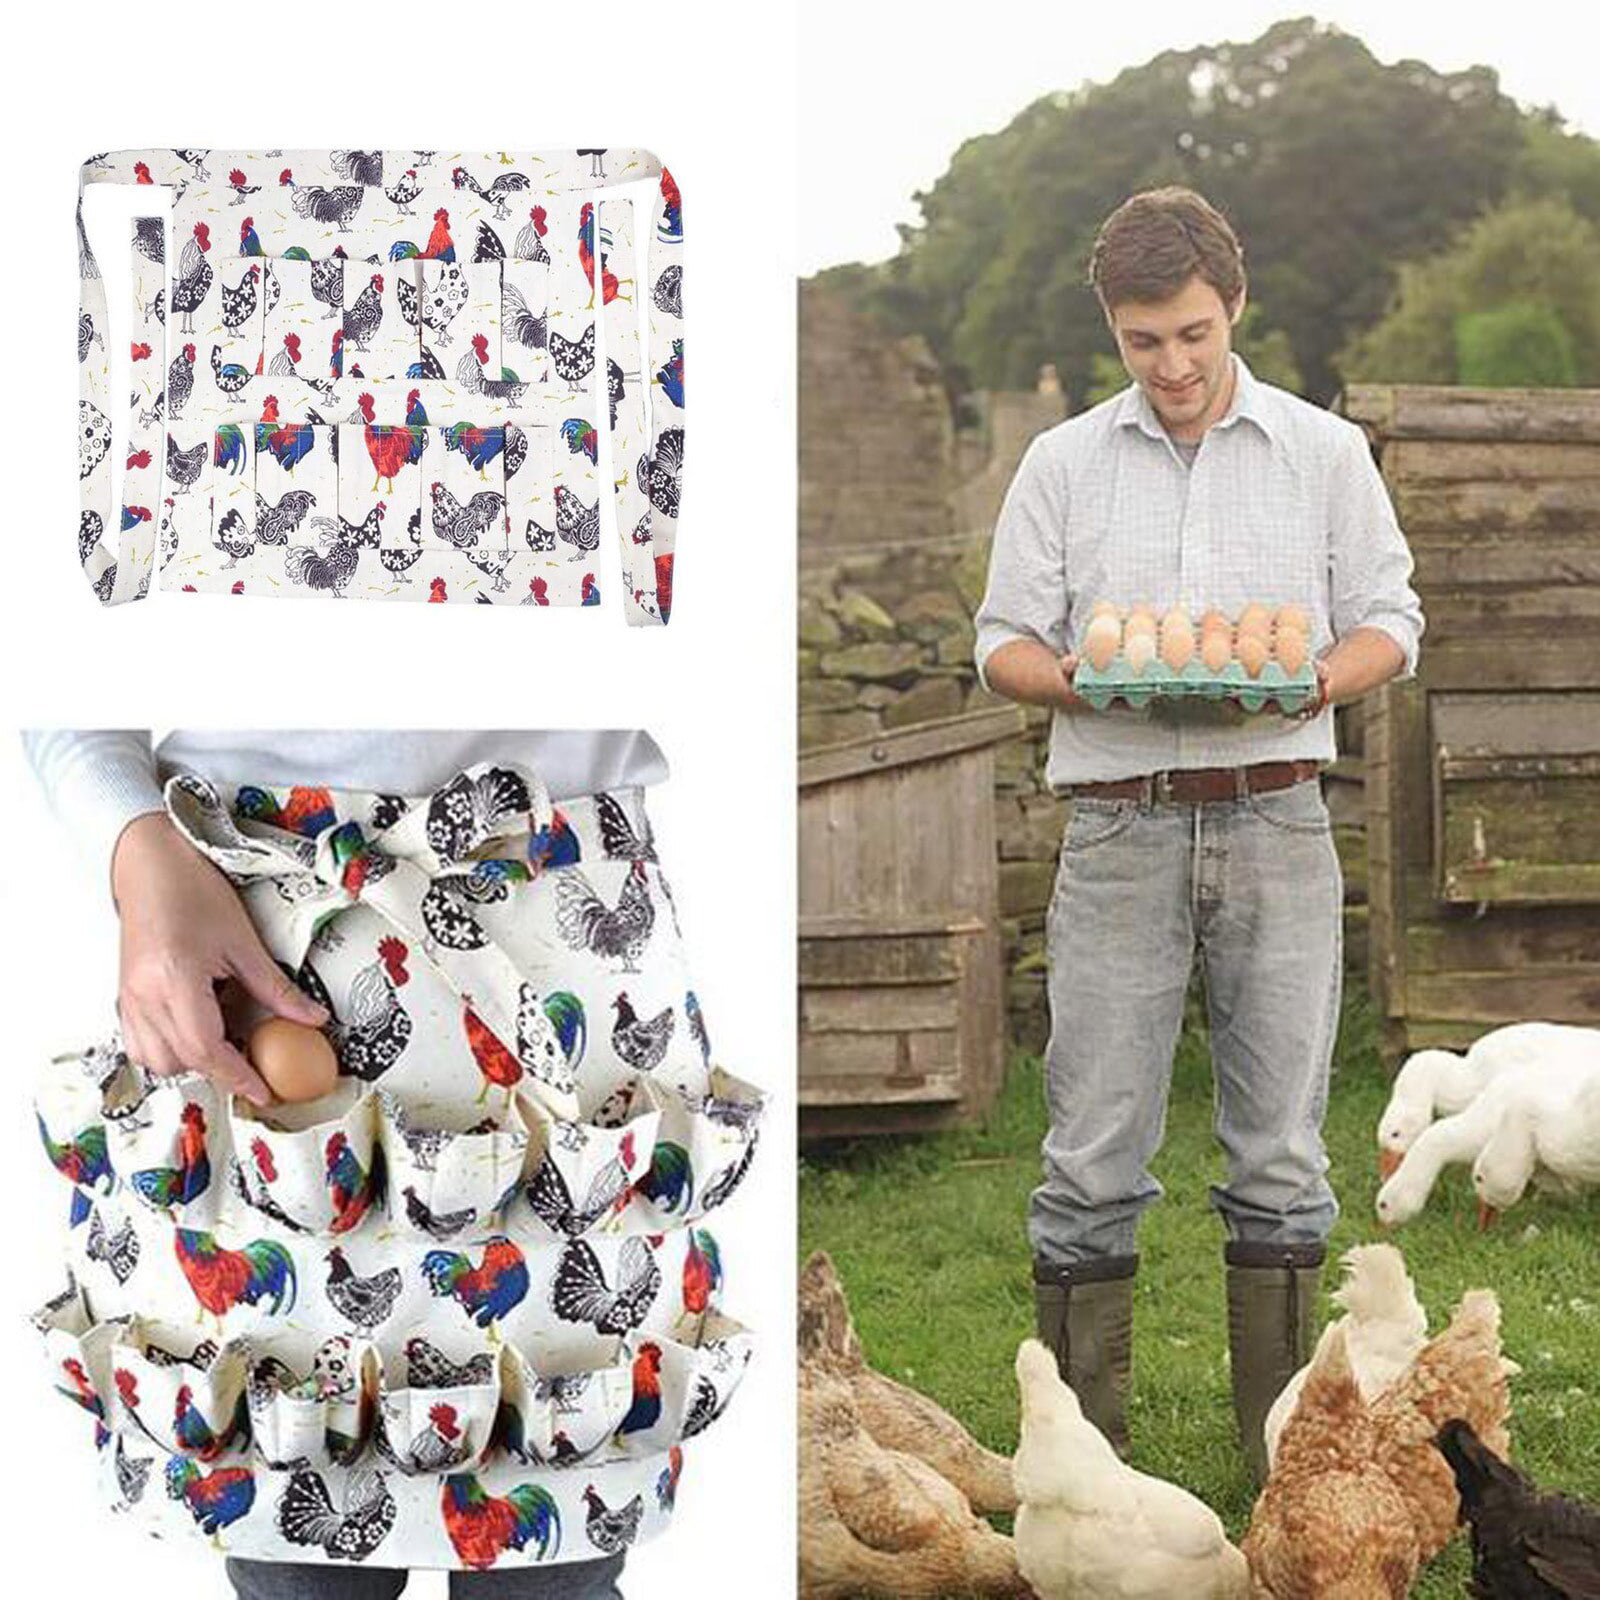 ETIUC Durable Egg Gathering Apron 18 Deep Pockets Canvas Fabric for Duck  Goose Quail Dove Eggs Holder Easter Egg Collecting Apron Chicken Coop Tool